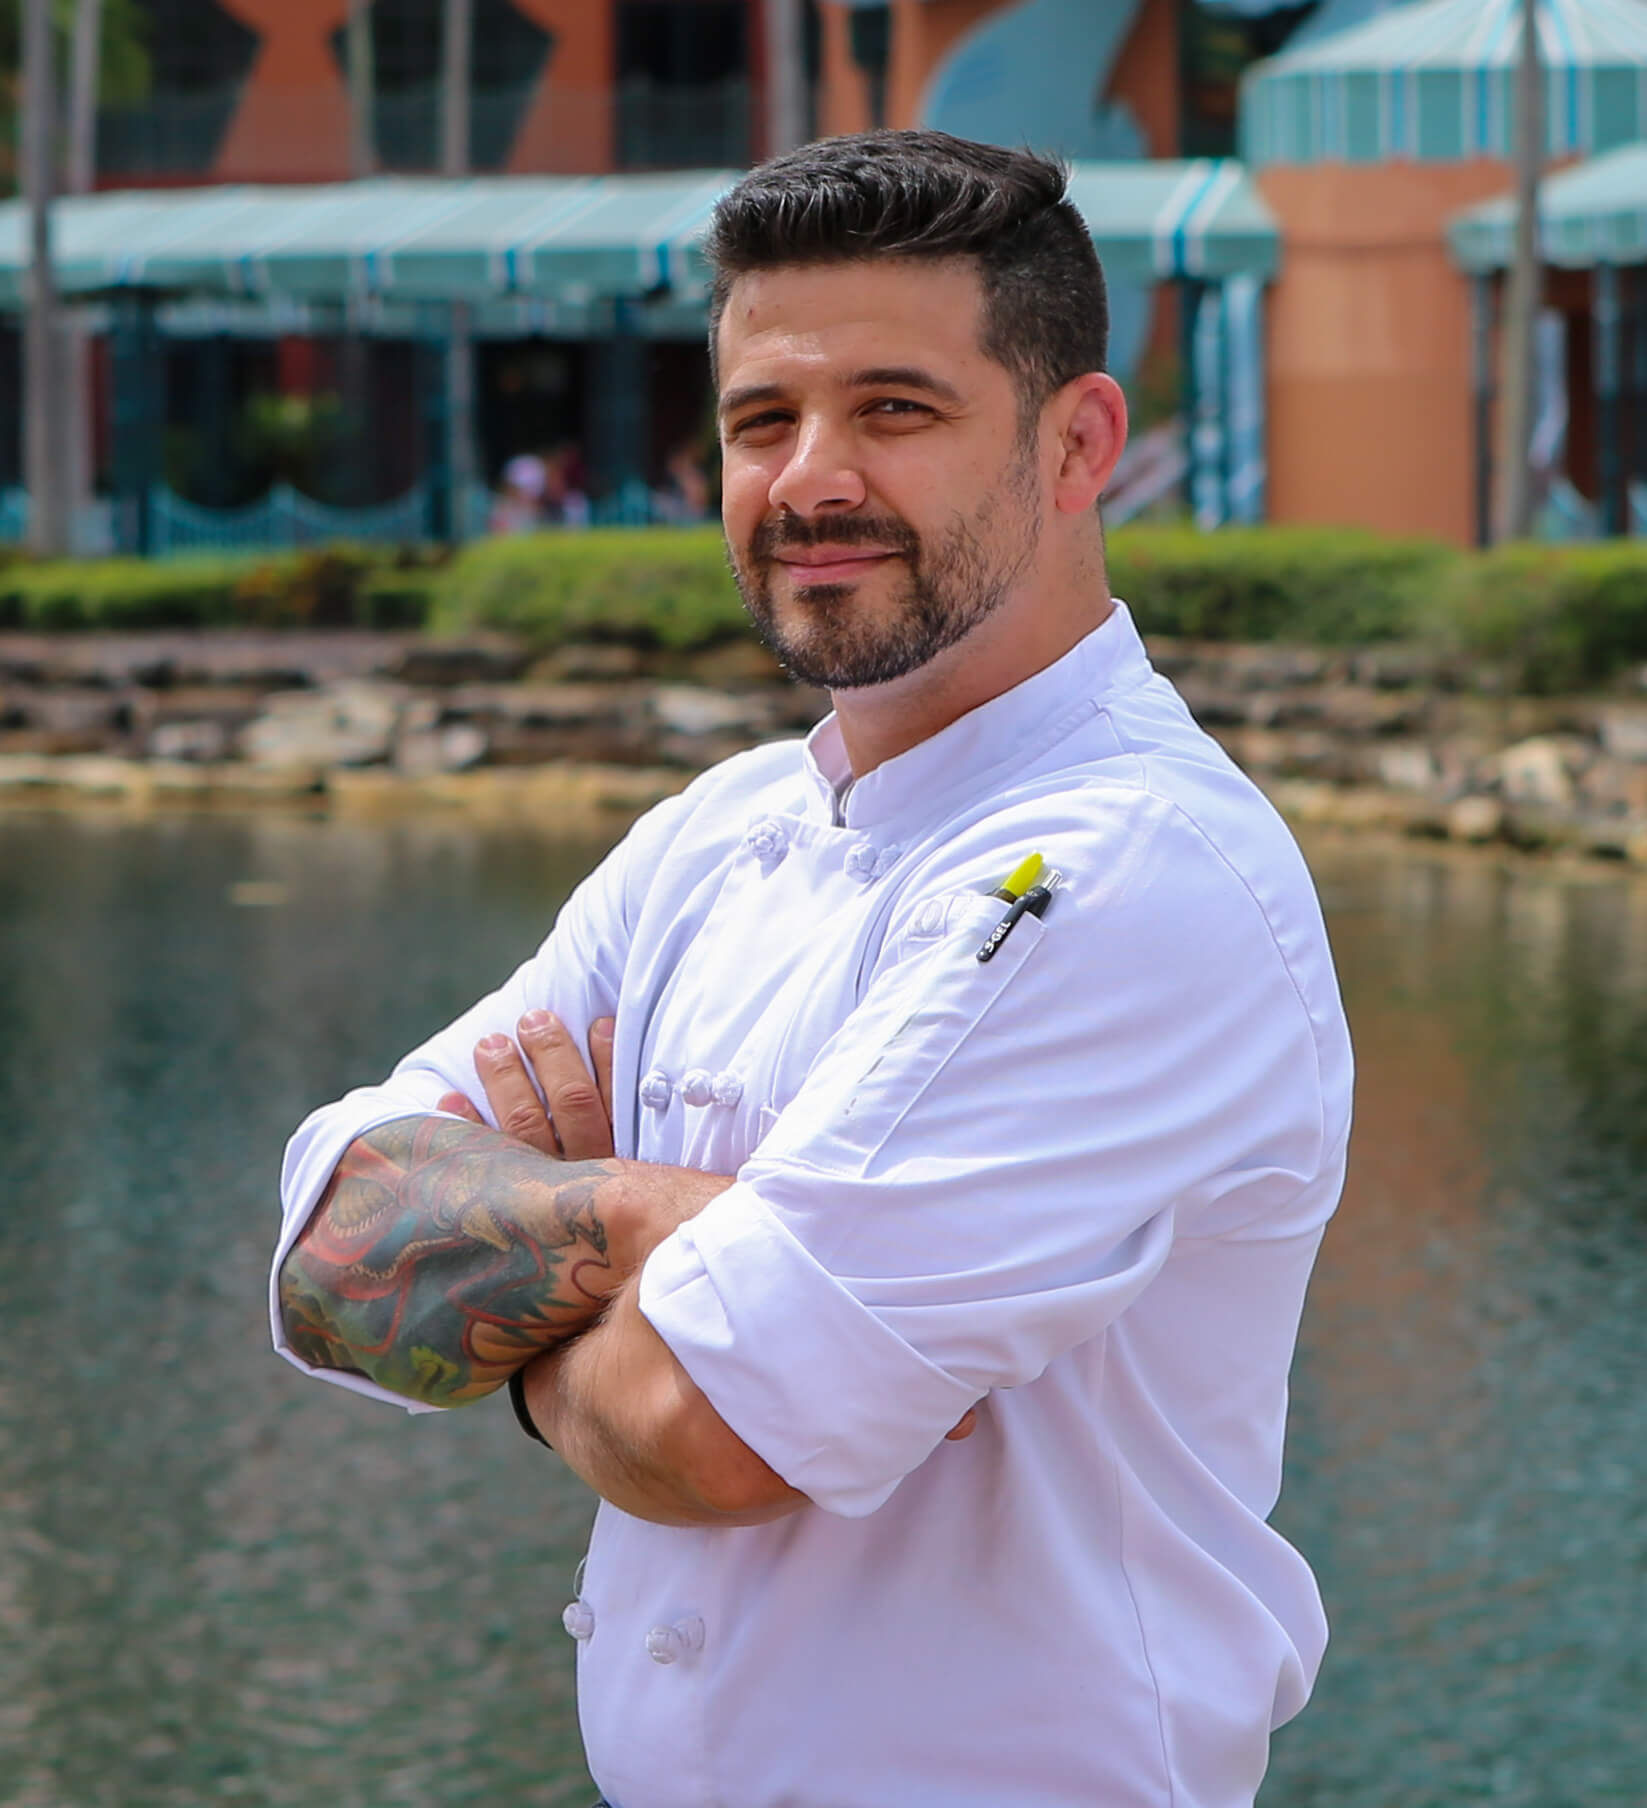 Chef Mauricio with Hotel in the Background